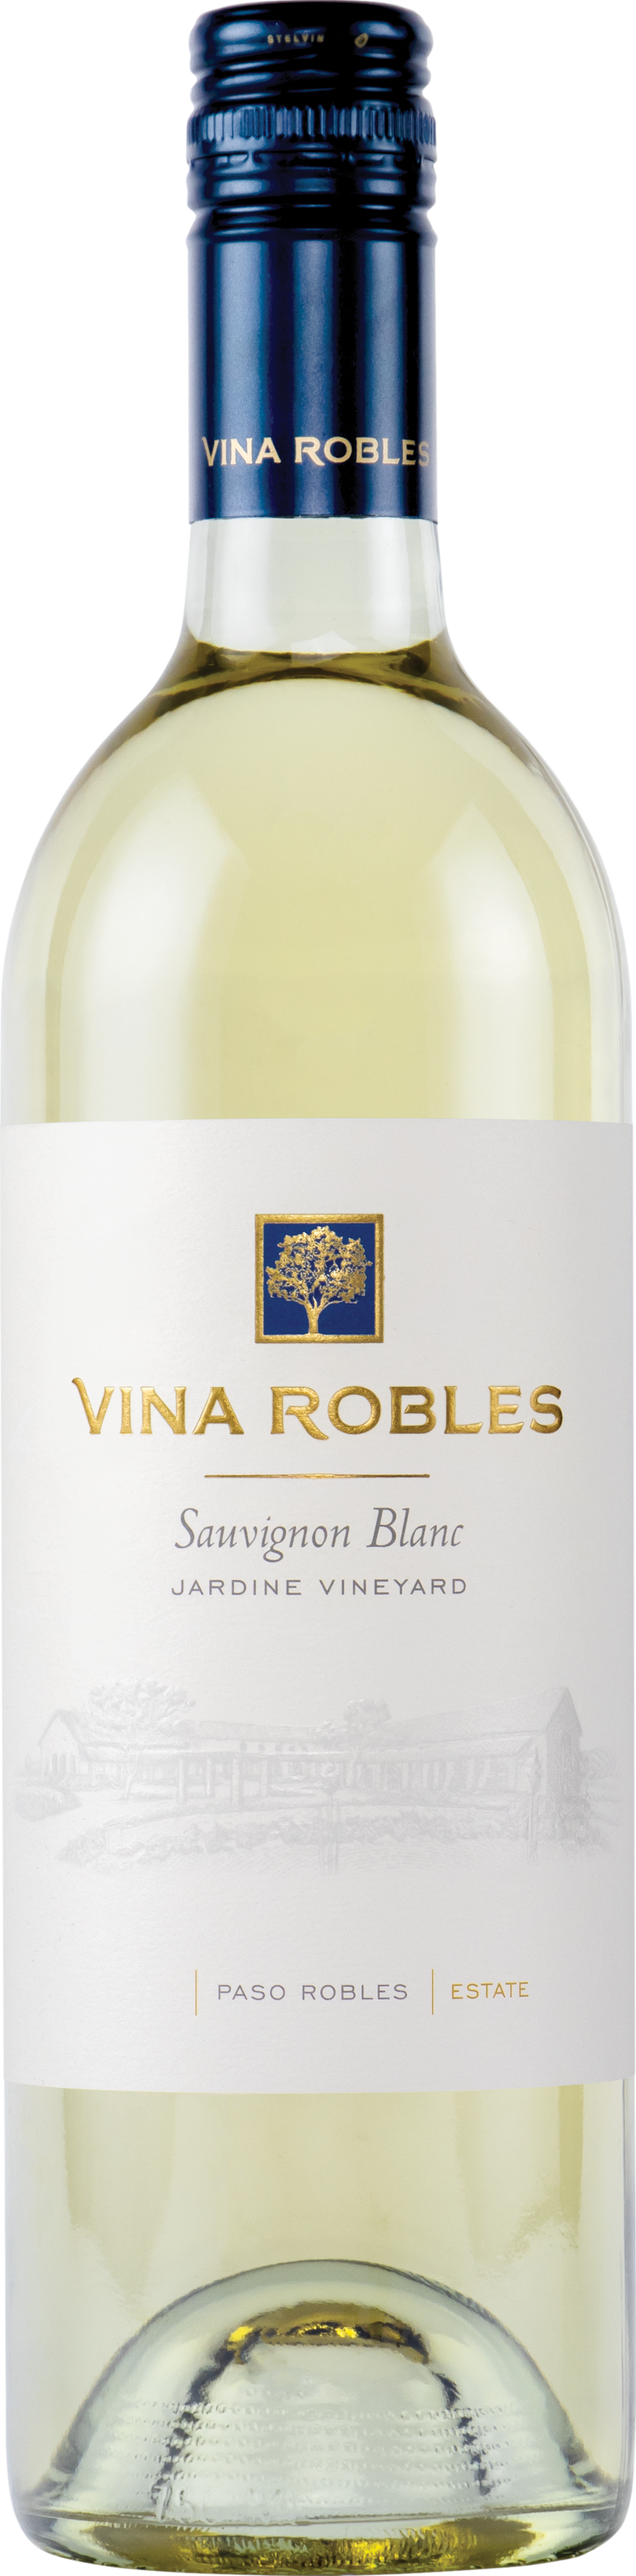 Product image of Vina Robles Sauvignon Blanc 2021 from 8wines